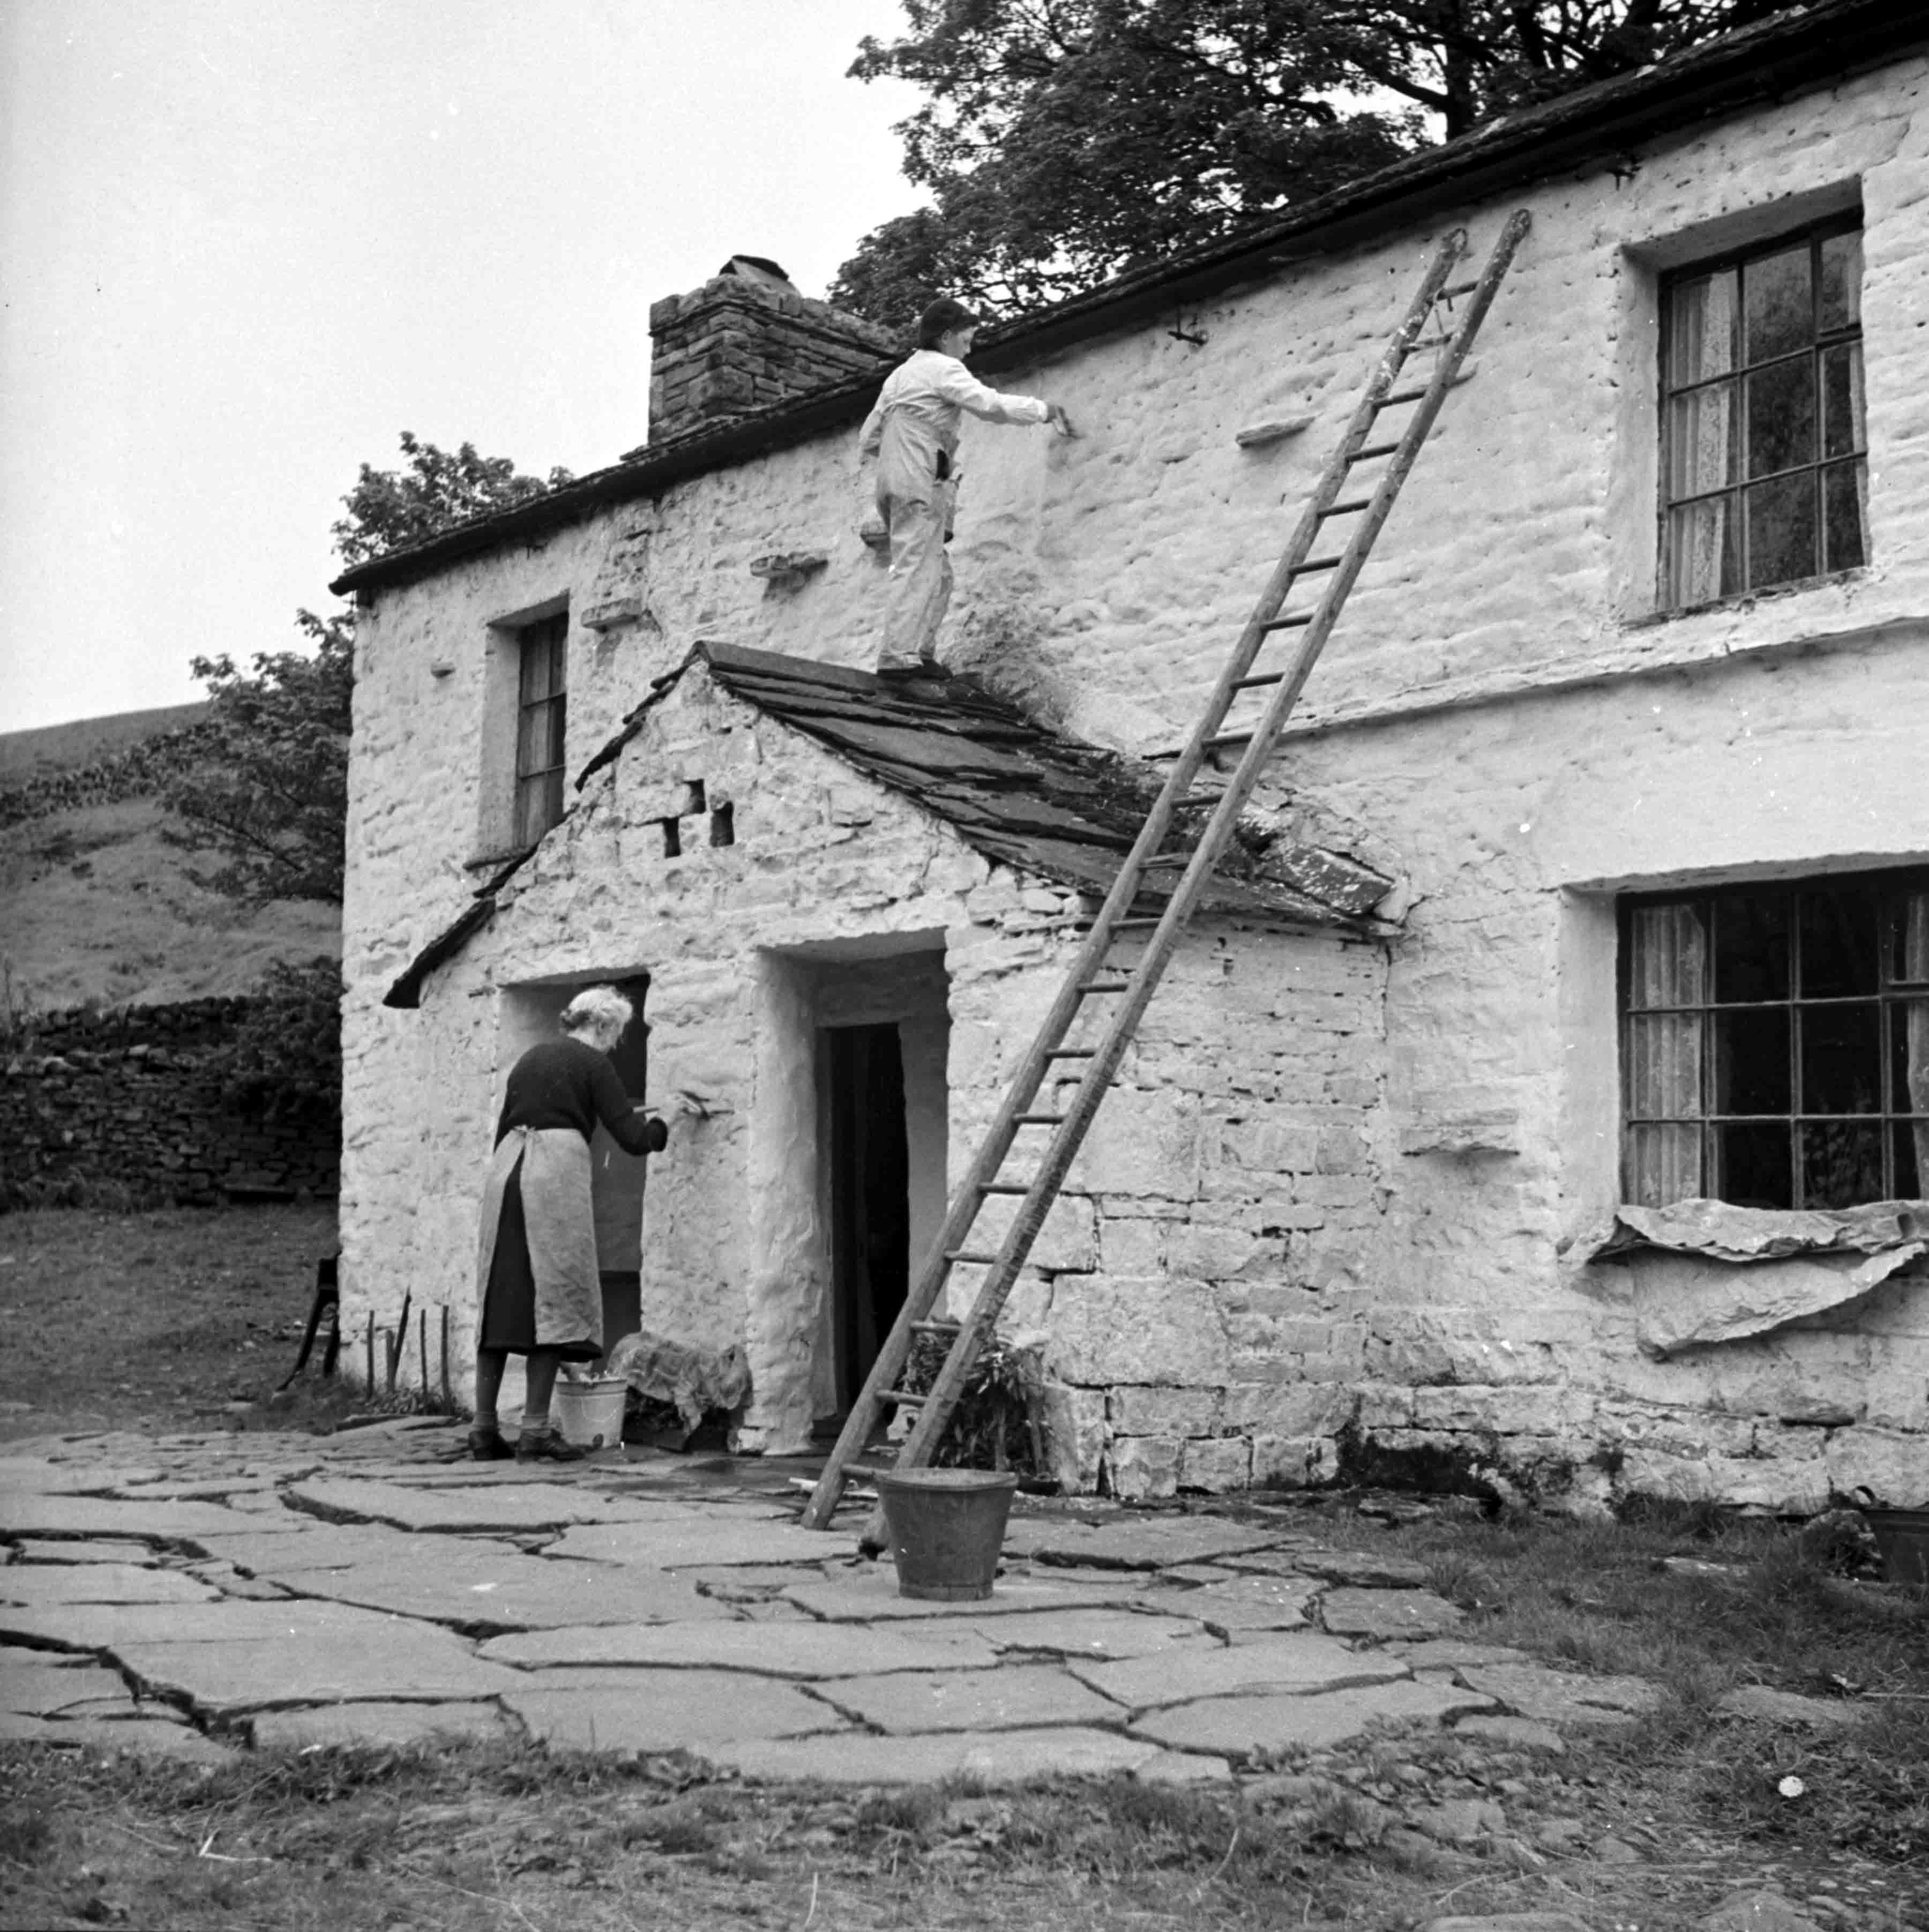 Two people hard at work in Garsdale, giving a cottage a springtime whitewash (undated). From the Bertram Unné photographic collection.